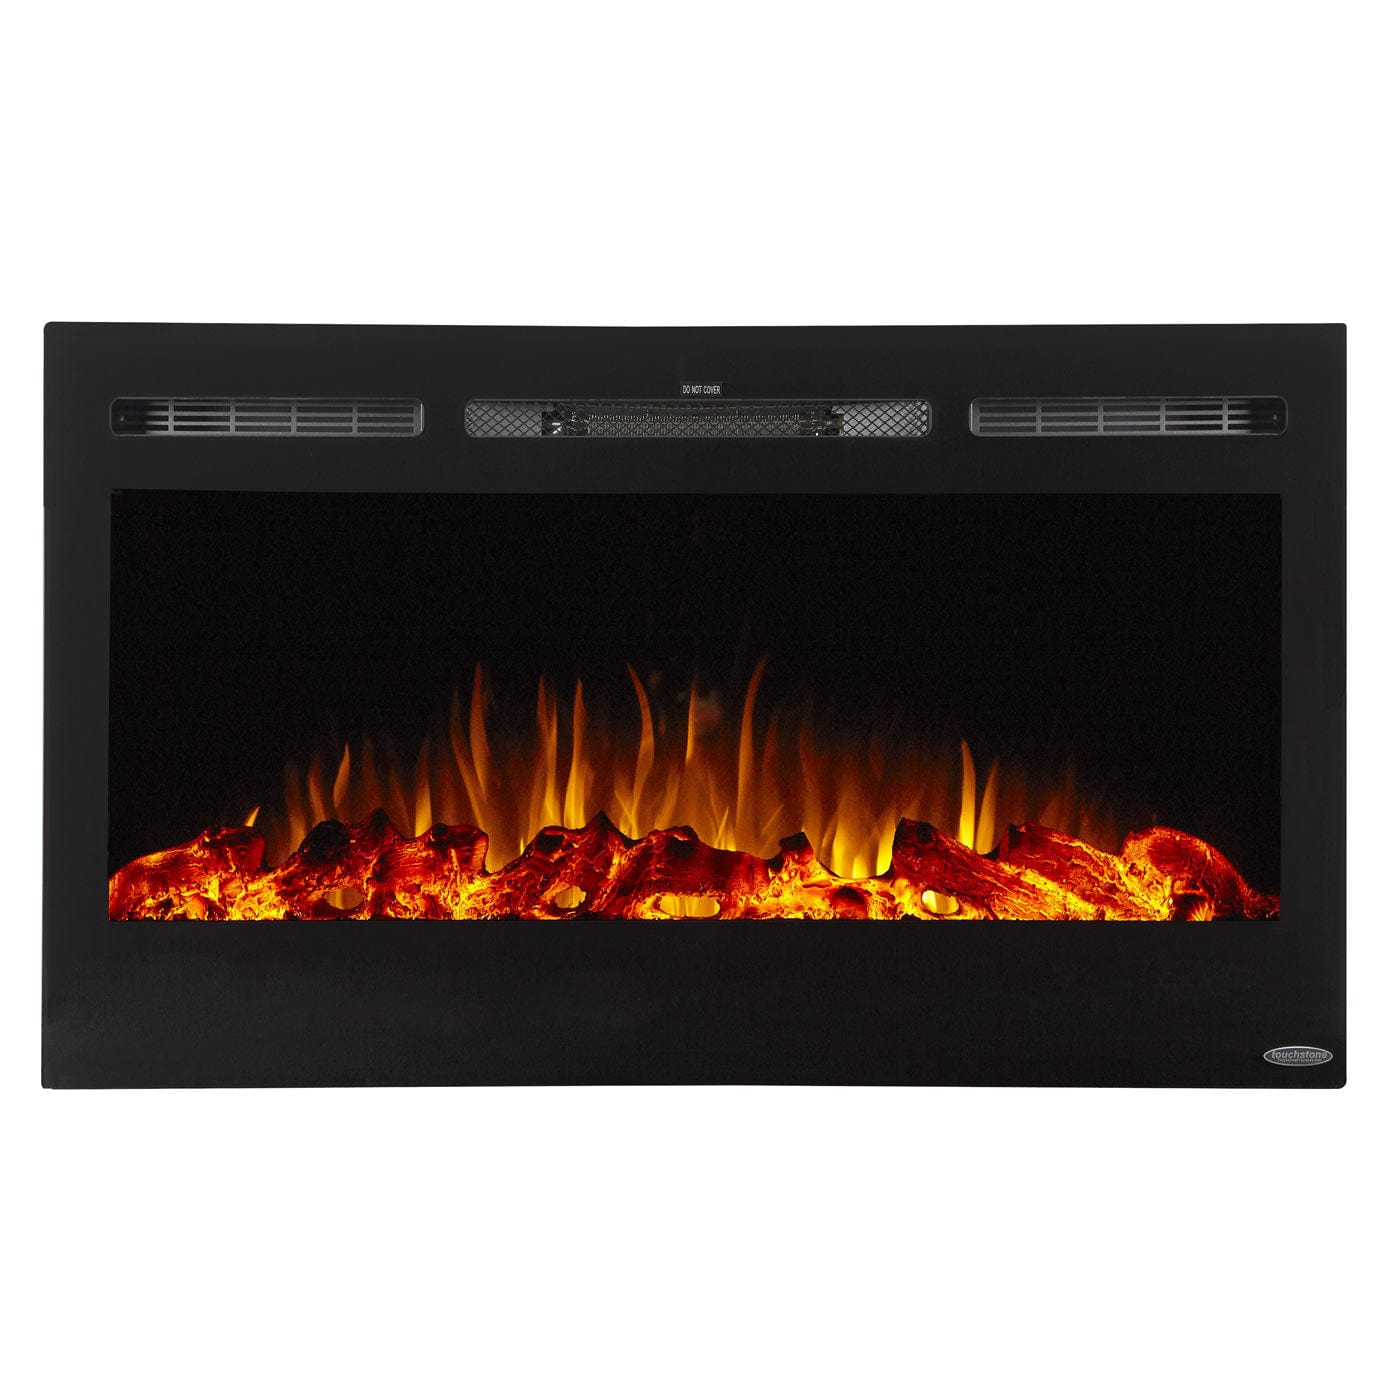 Touchstone Sideline 36 Electric Fireplace 80014 perfect for small rooms